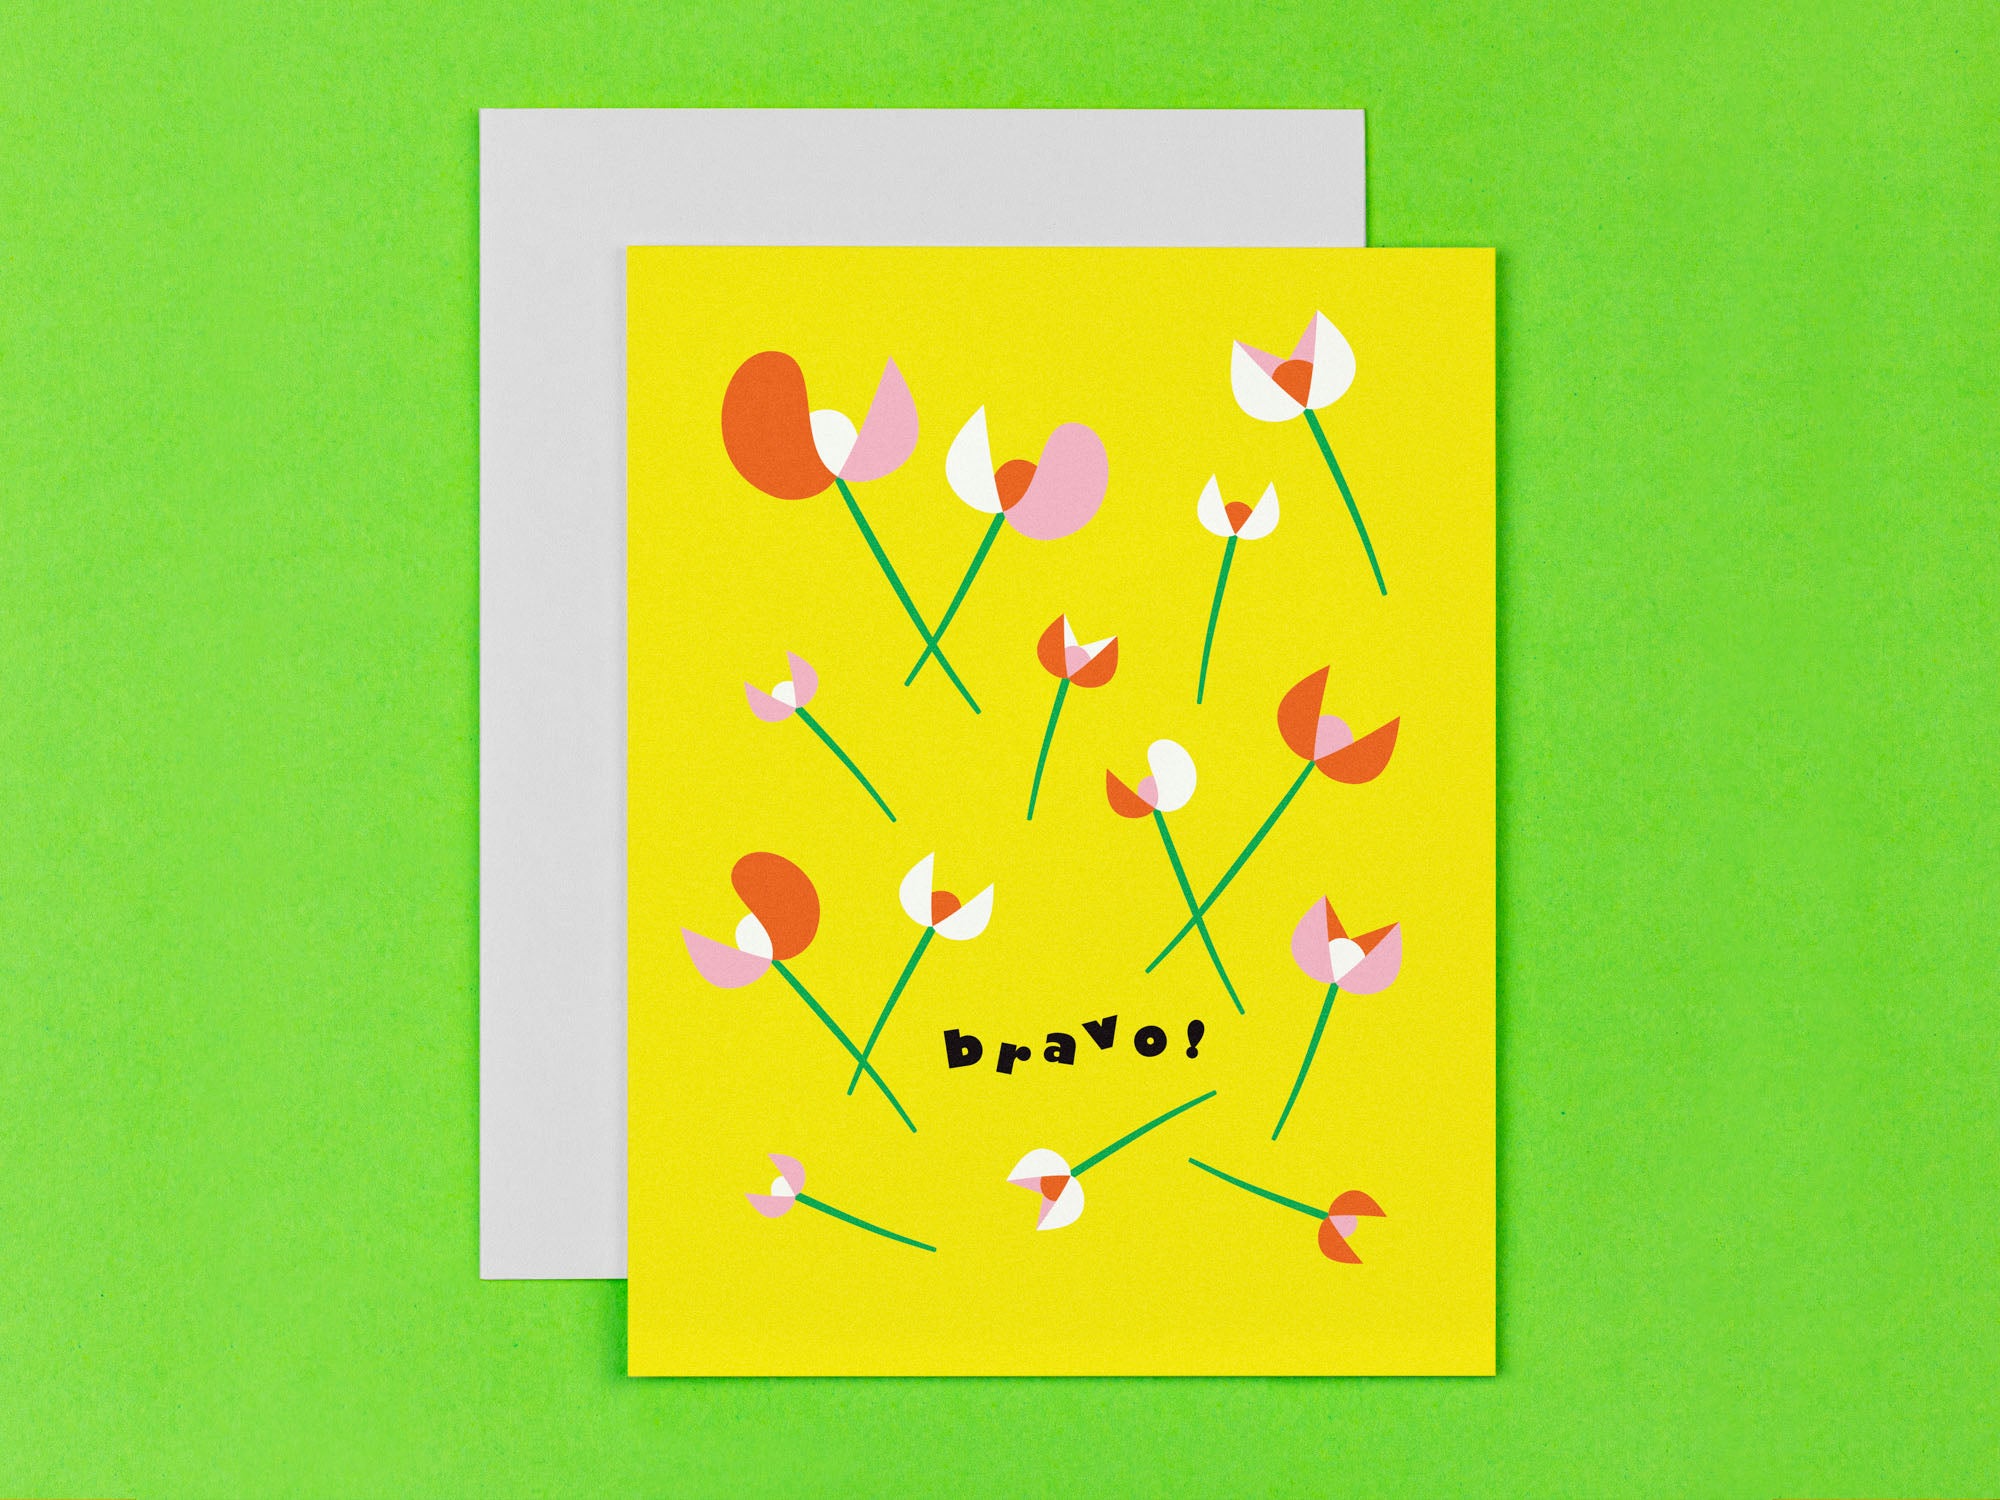 Bravo floral congratulations card with flowers strewn about. Made in USA by My Darlin' @mydarlin_bk